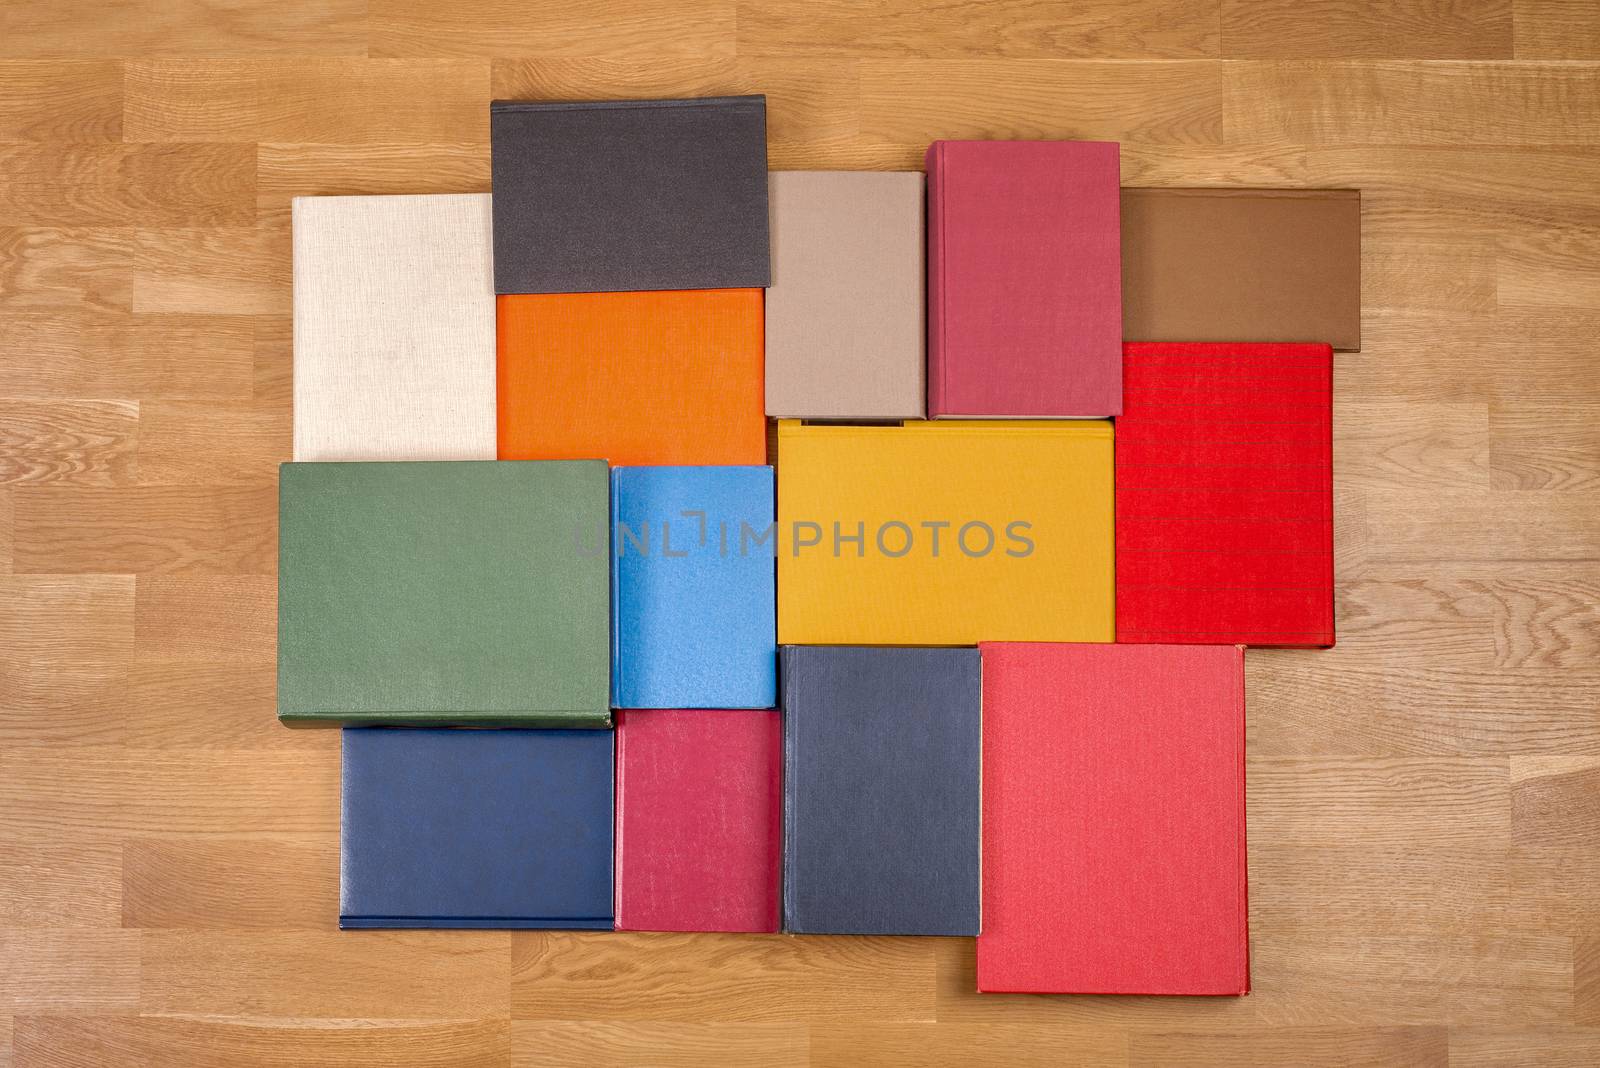 colour old books on wooden floor background